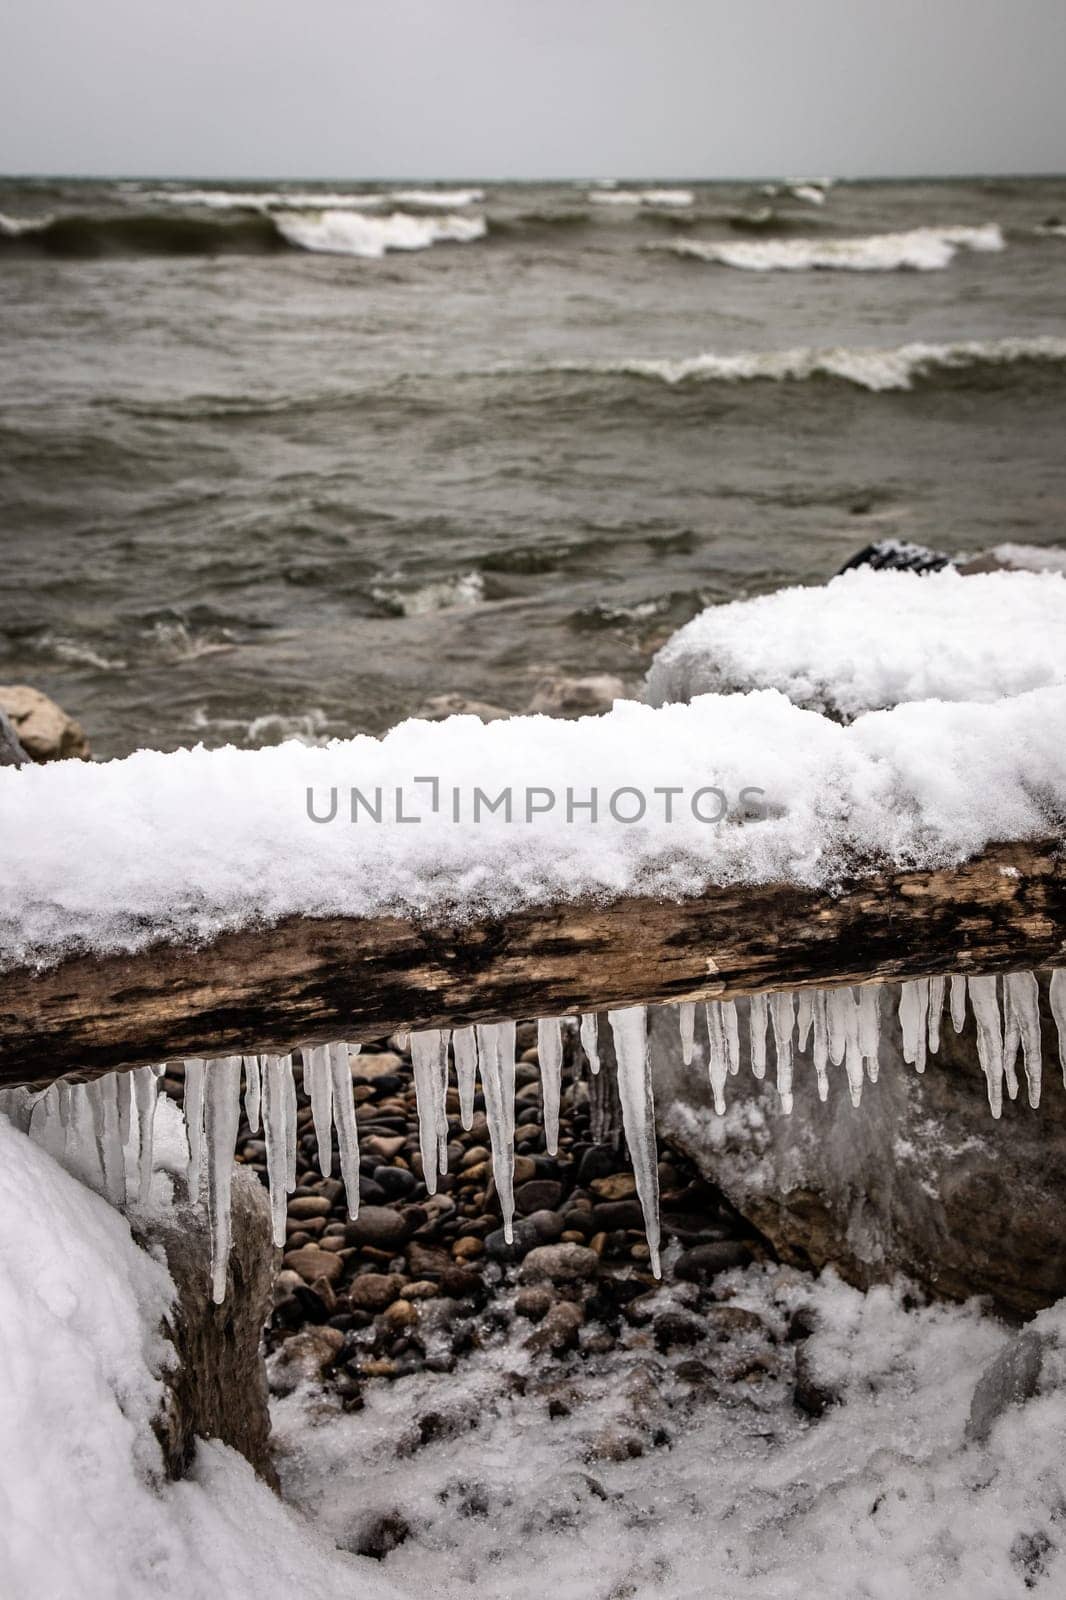 Log covered by snow and ice with waves coming in and ice on the shoreline in the Bruce Peninsula, Ontario by Granchinho